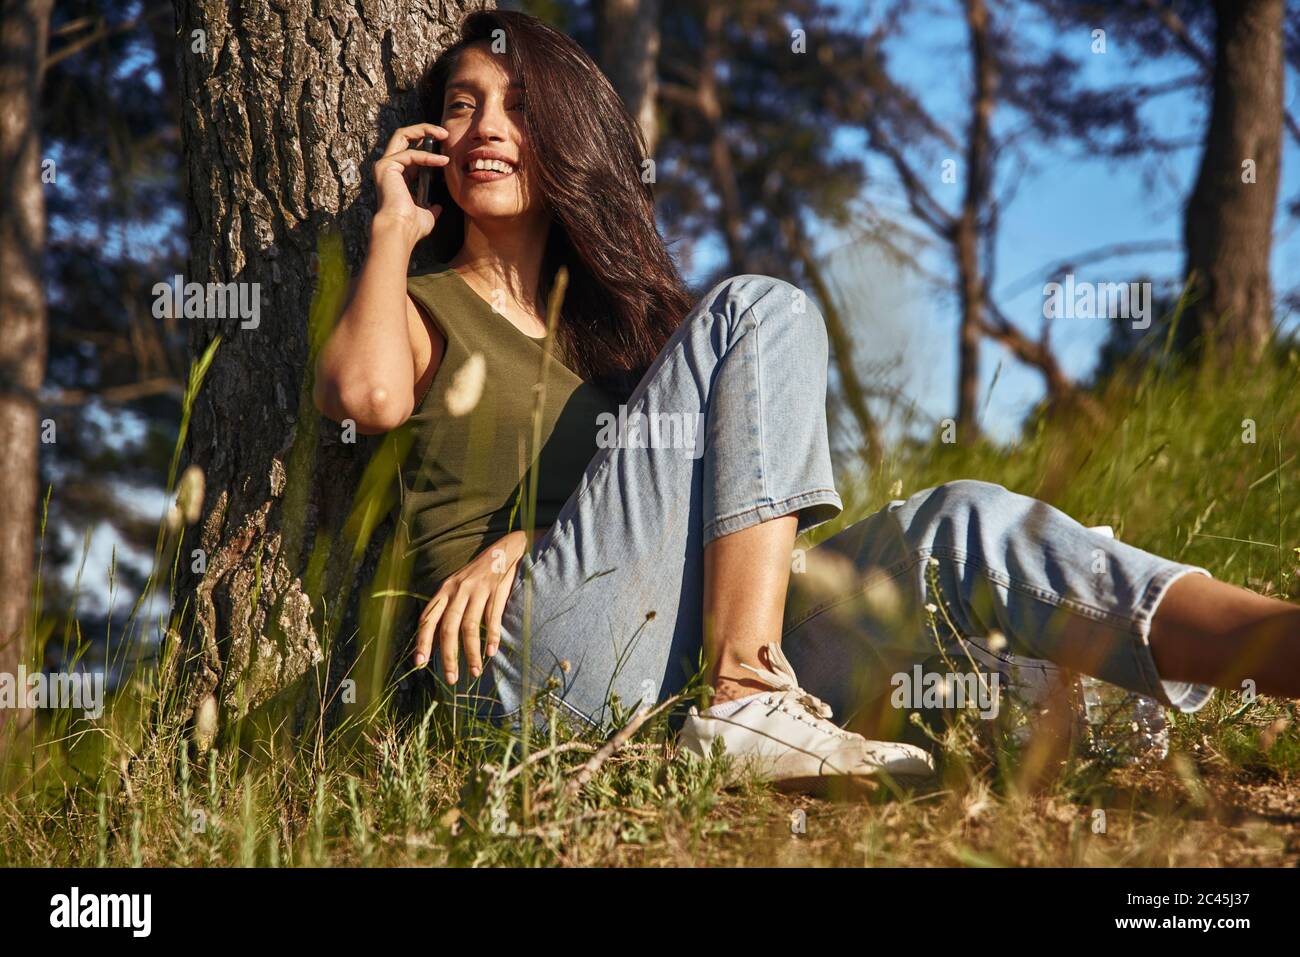 Portrait of young woman with long brown hair sitting under a tree in a forest, talking on mobile phone. Stock Photo